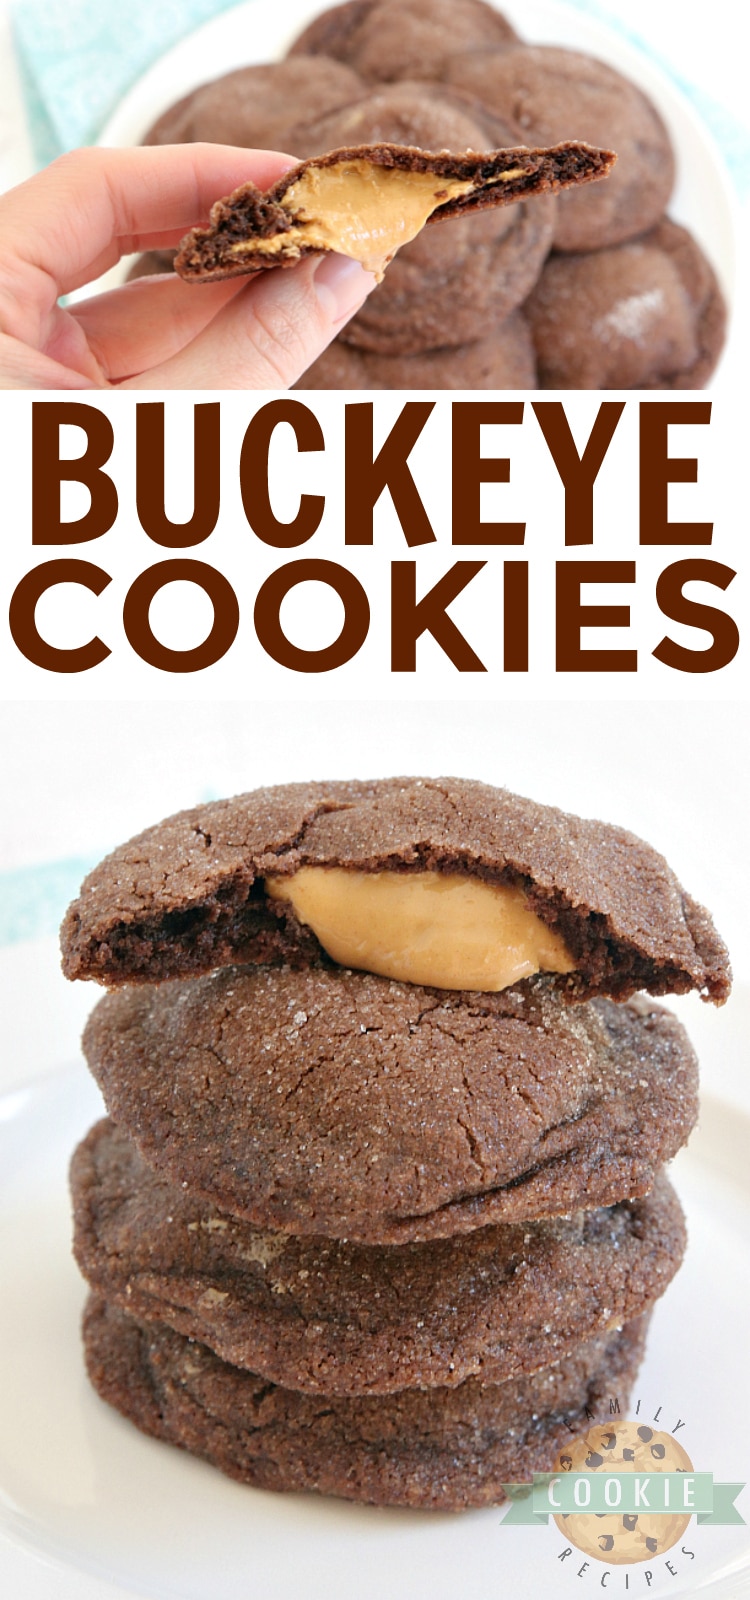 Buckeye Cookies are soft and chewy chocolate cookies with a gooey peanut butter filling in the middle. This chocolate and peanut butter cookie recipe is unique, but so easy to make!